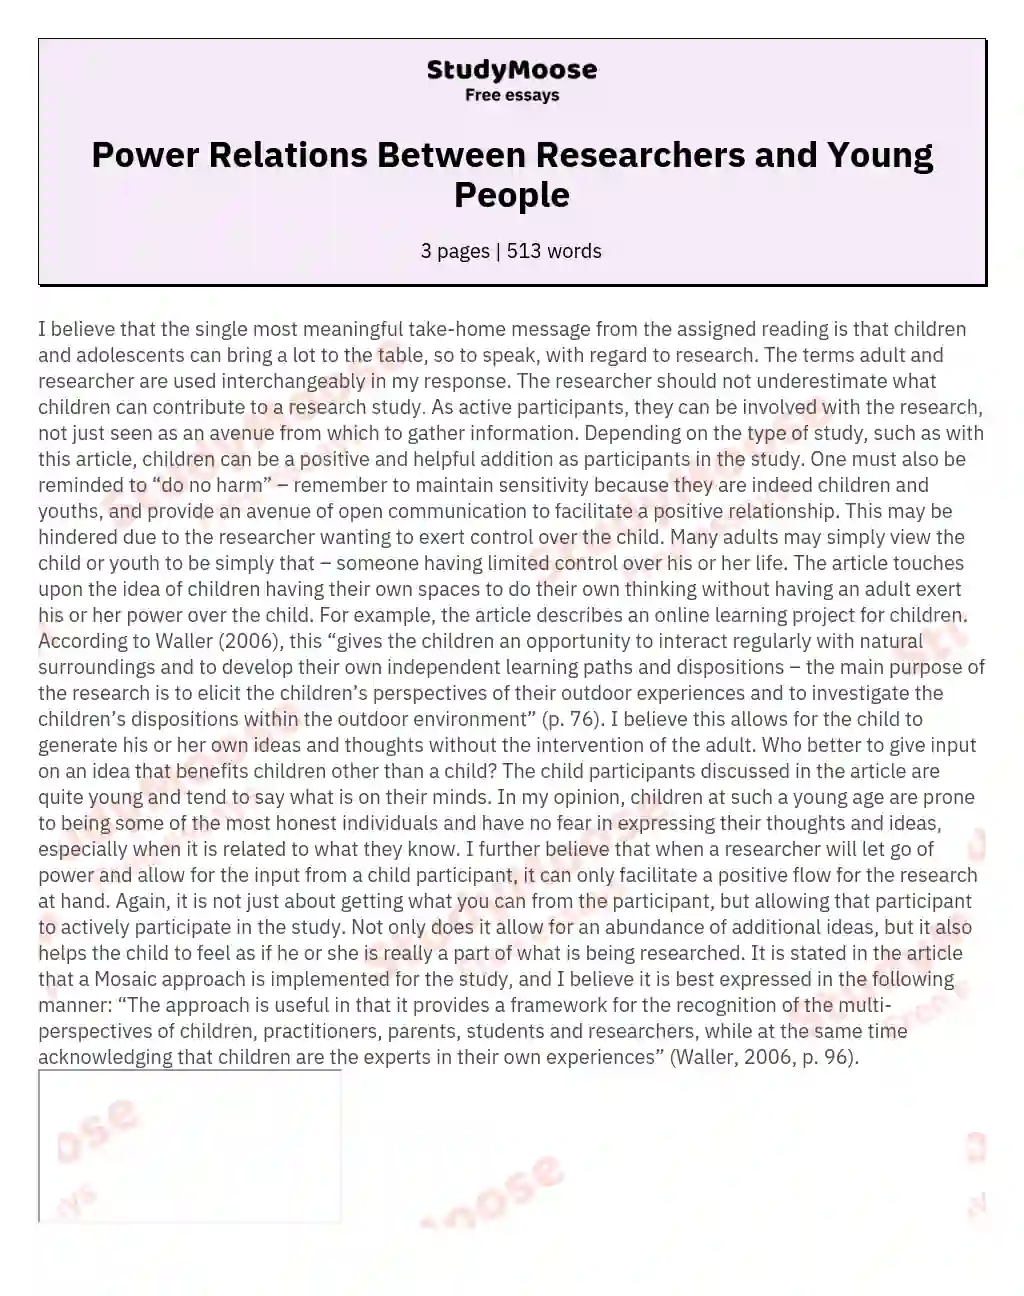 Power Relations Between Researchers and Young People essay